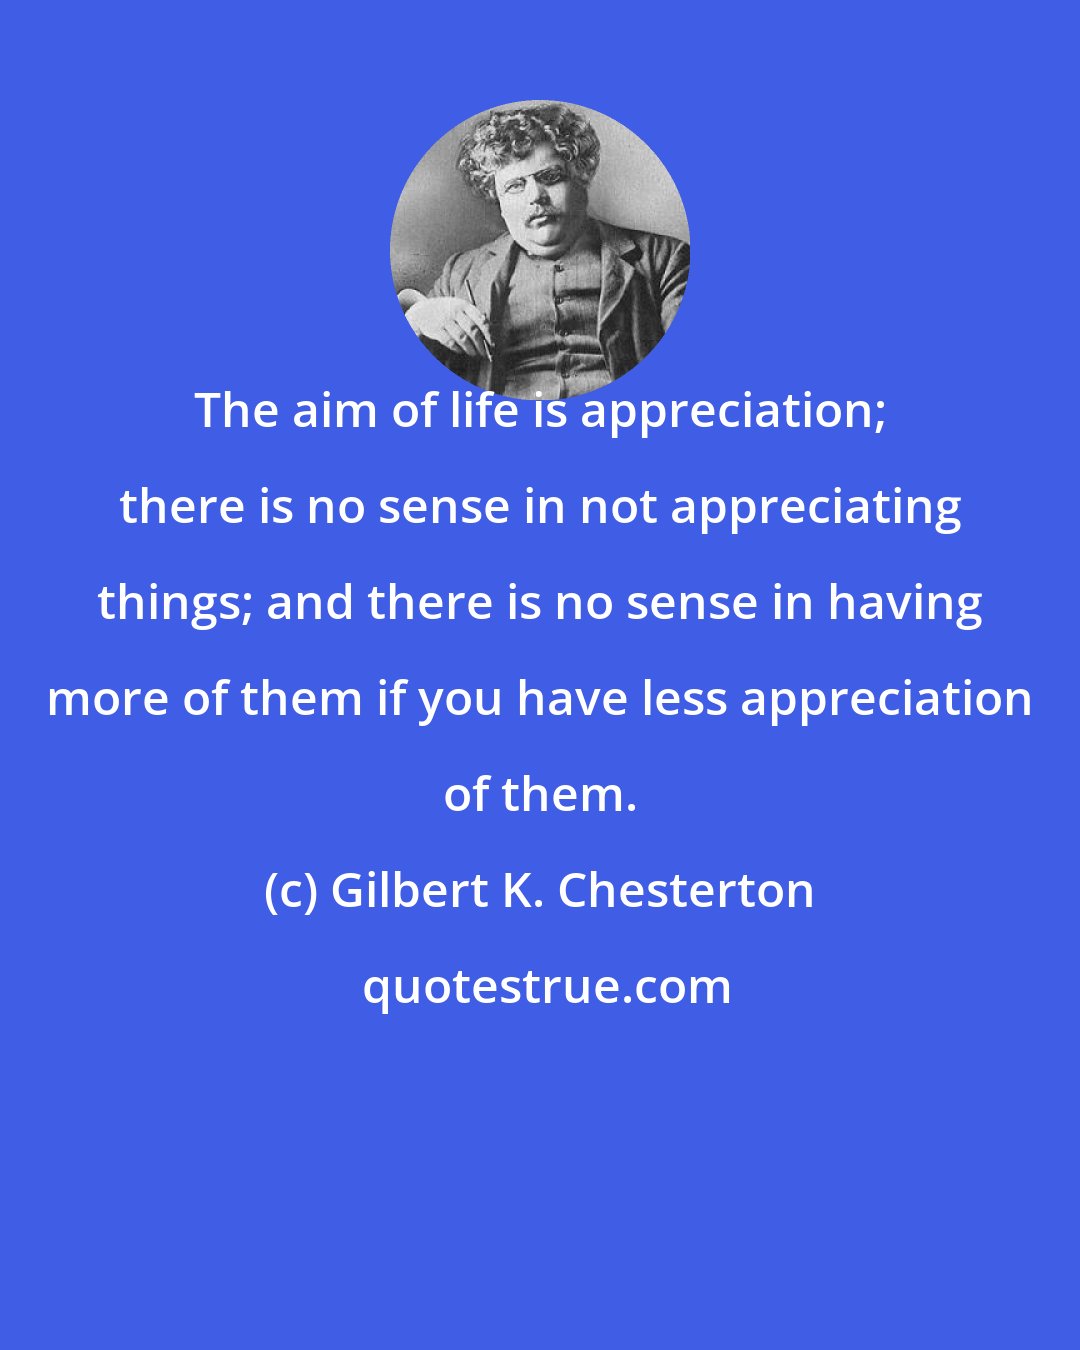 Gilbert K. Chesterton: The aim of life is appreciation; there is no sense in not appreciating things; and there is no sense in having more of them if you have less appreciation of them.